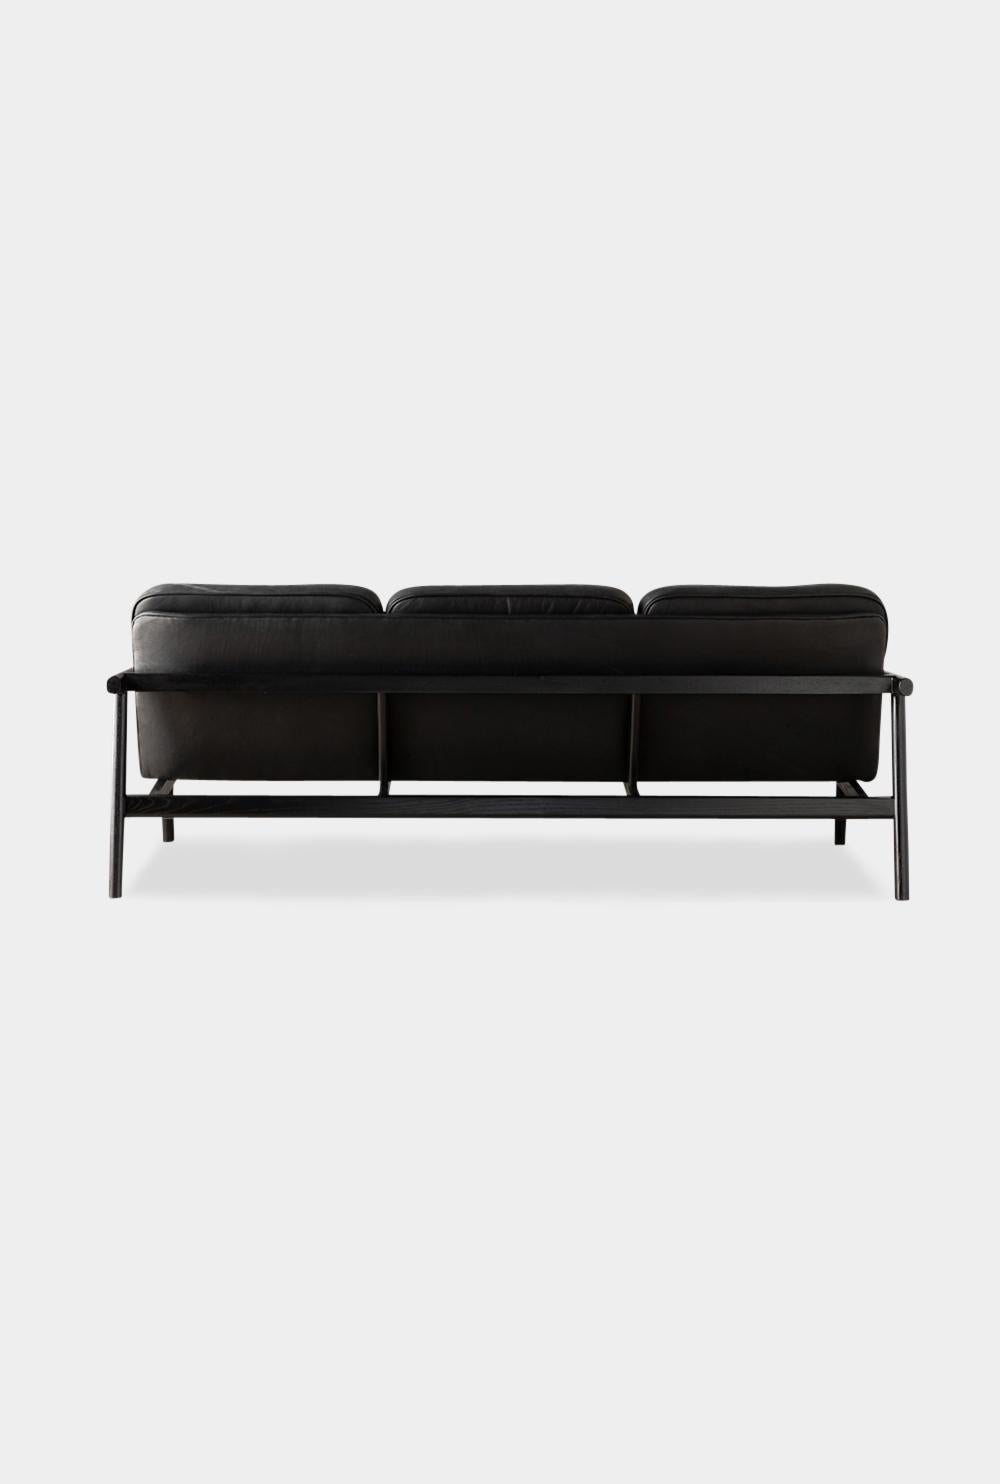 This handmade solid wood constructed sofa includes handcut joinery and custom upholtered seat and seat back cushions.

This sofa is shown in our in house black leather with an ebonized oak frame.
Most Maharam upholstery fabrics have been